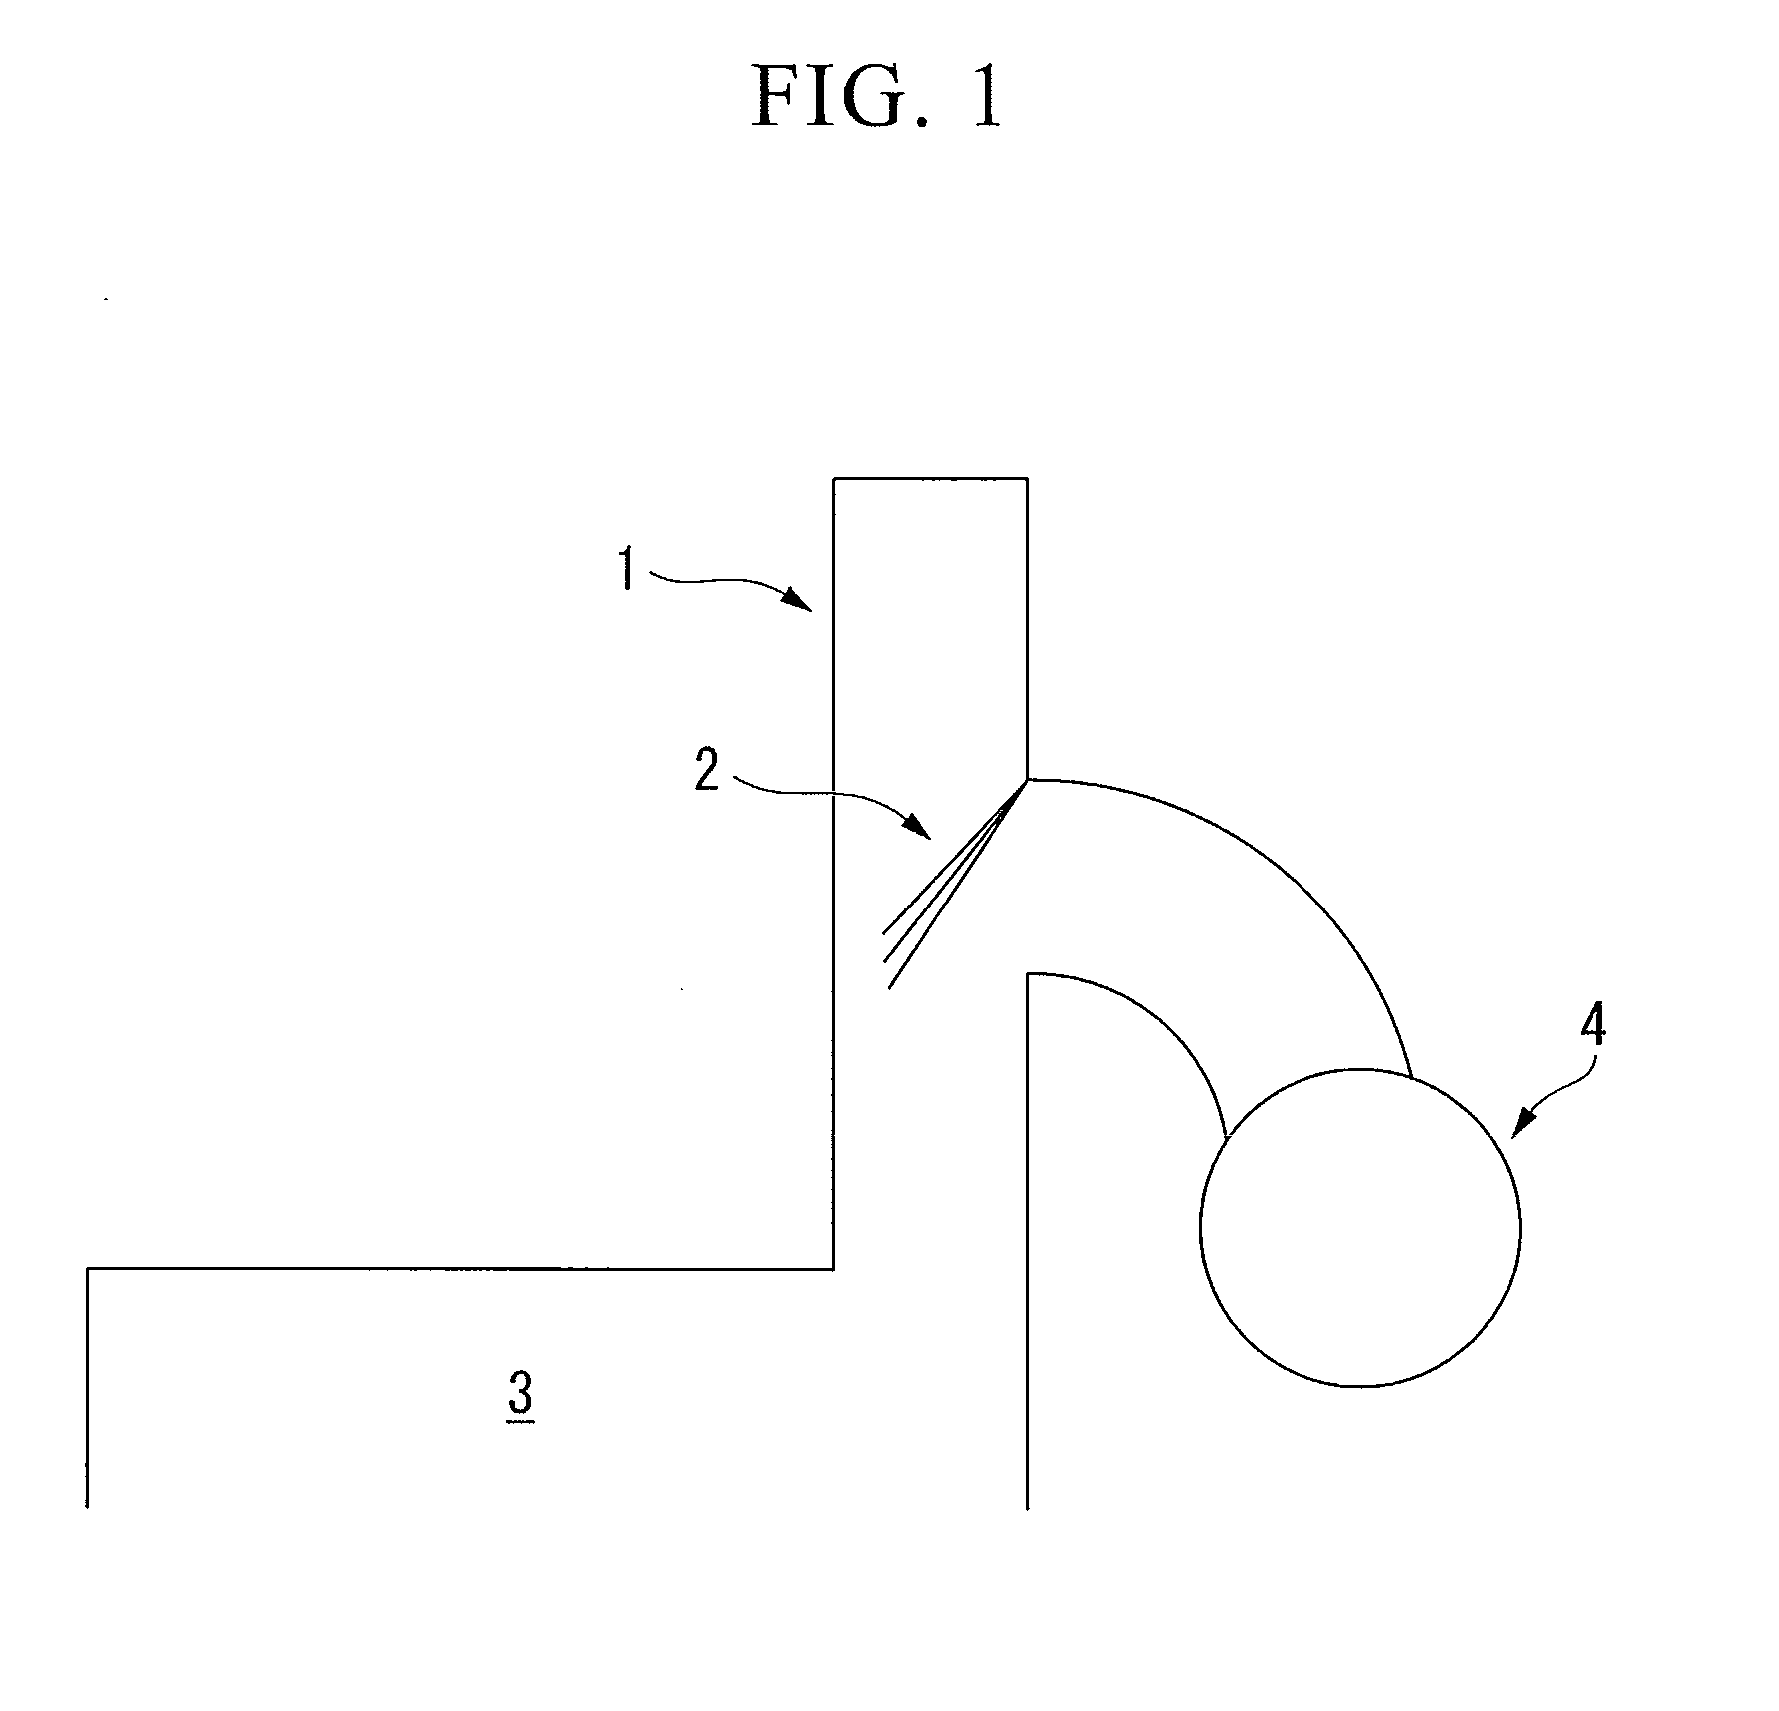 Catalyst for reforming tar-containing gas, method for preparing catalyst for reforming tar containing gas, method for reforming tar-containing gas using catalyst for reforming tar-containing gas, and method for regenerating catalyst for reforming tar-containing gas